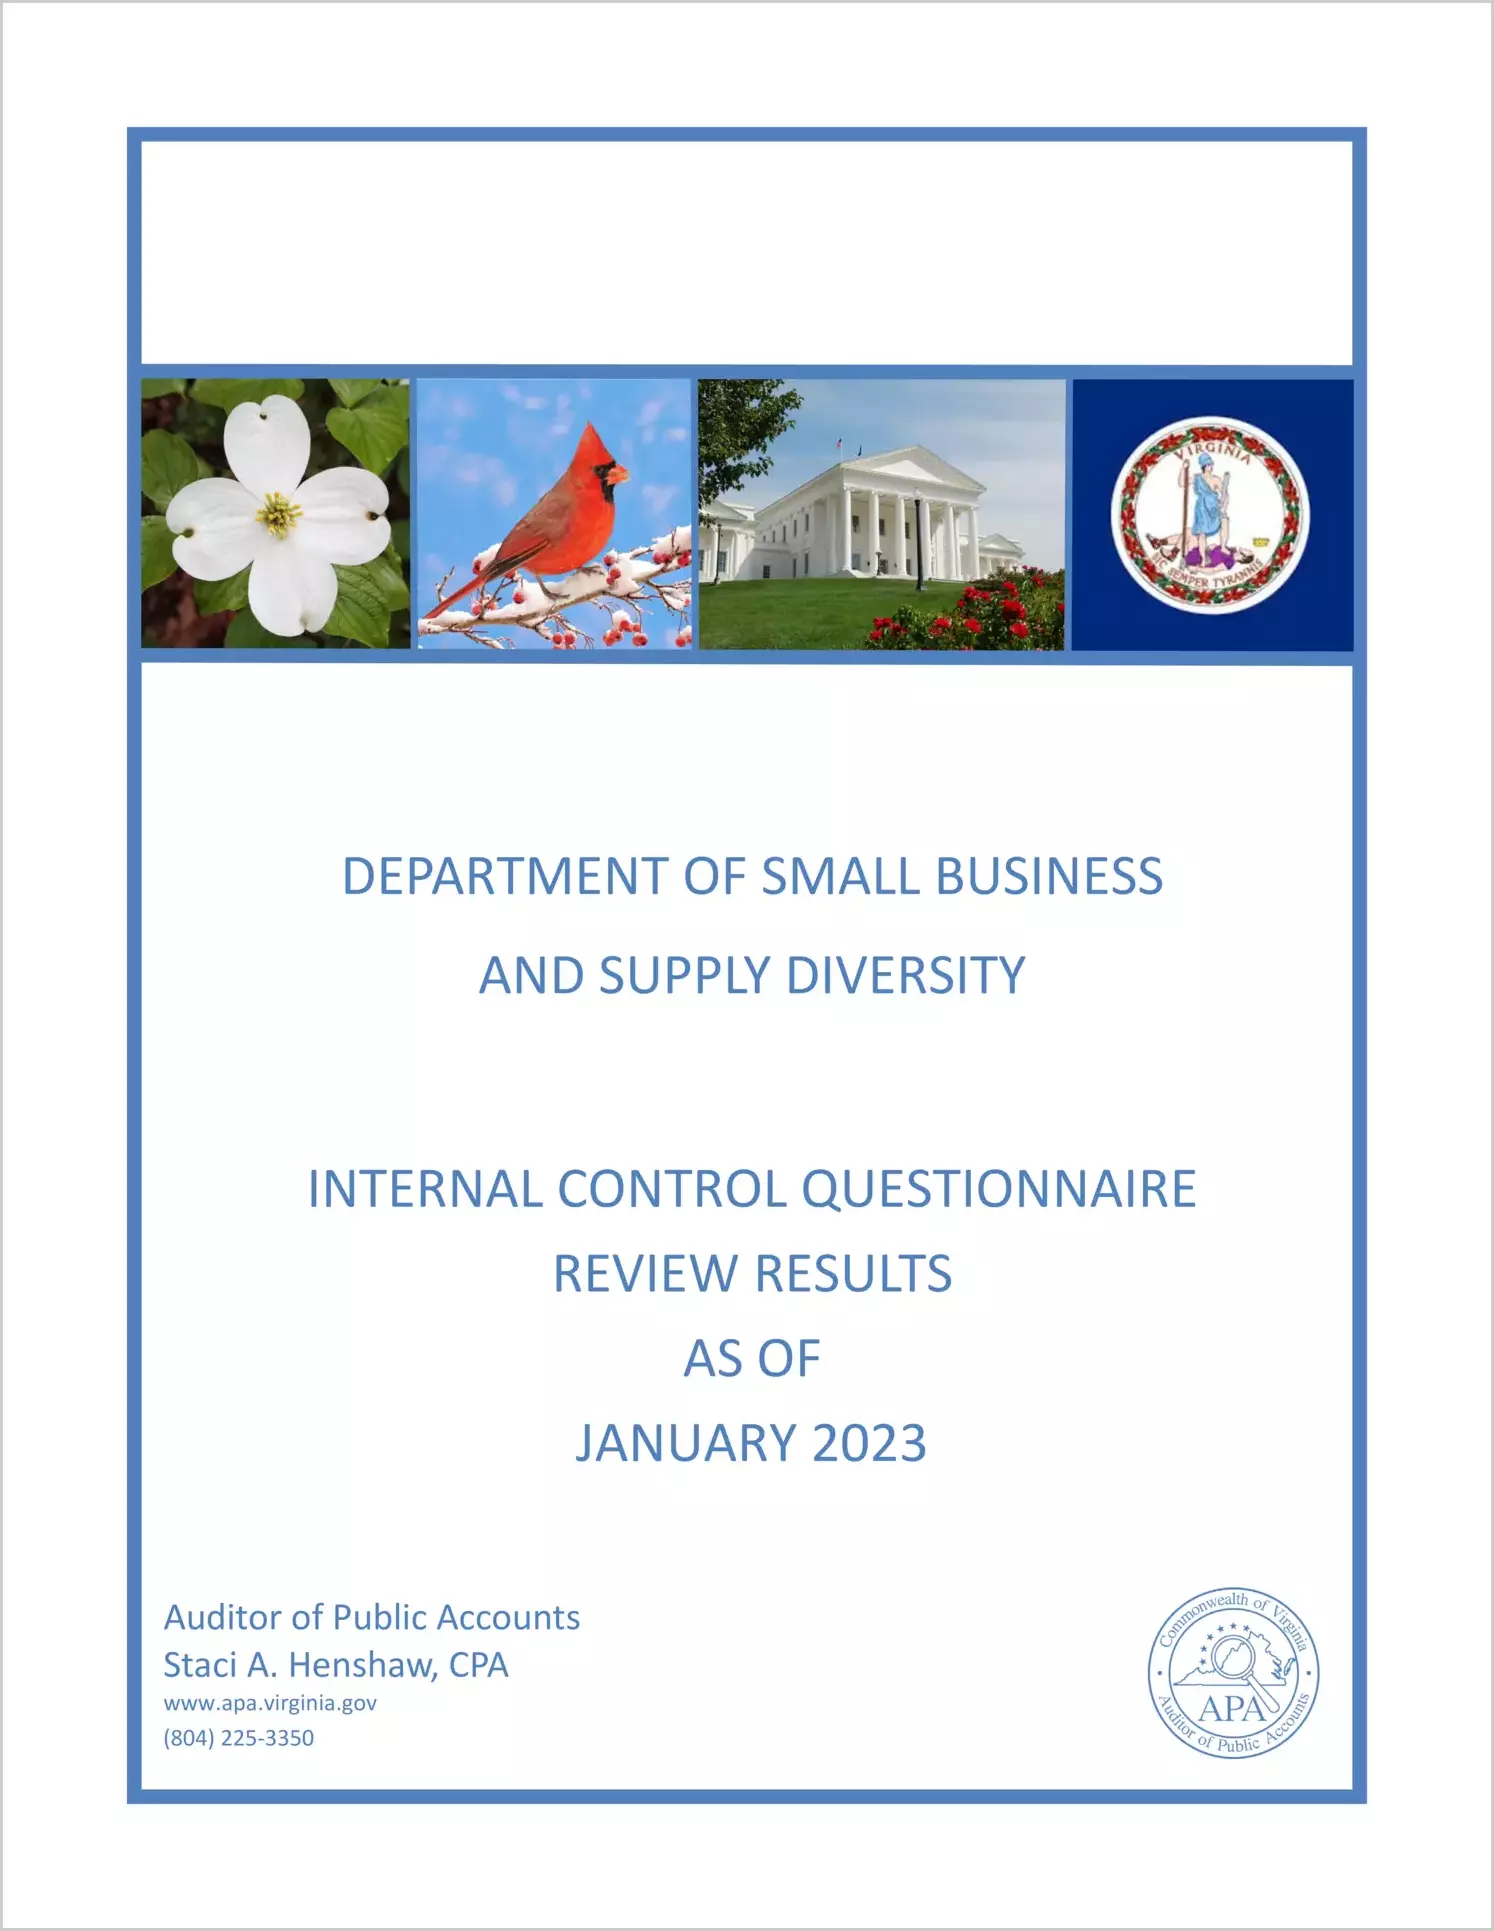 Department of Small Business and Supply Diversity Internal Control Questionnaire Review Results as of January 2023